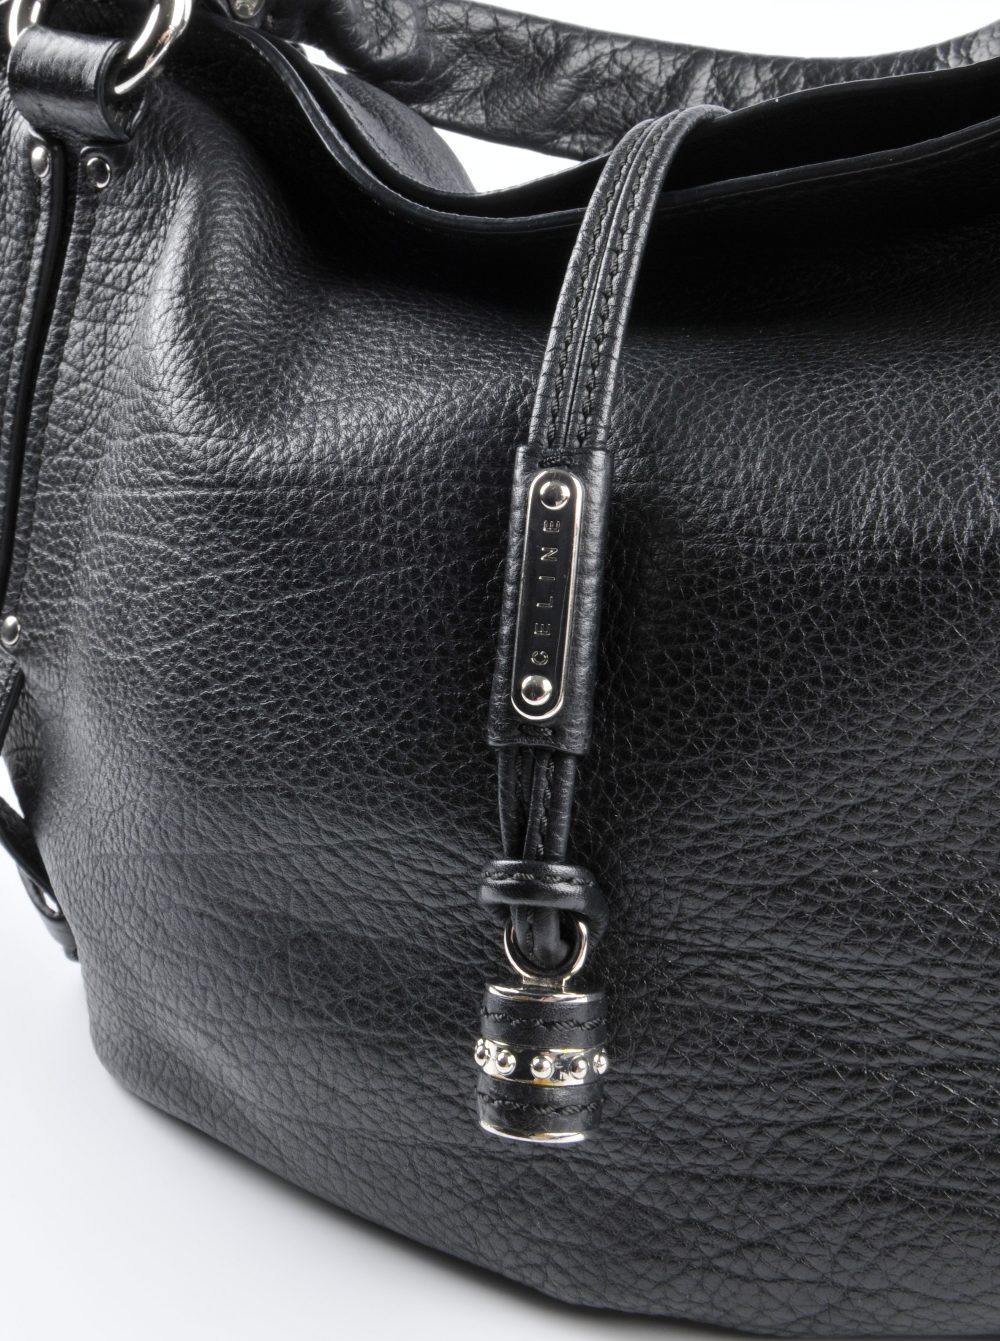 CELINE - a black leather Bittersweet hobo bag. Designed with a soft pebbled leather exterior, - Image 6 of 6